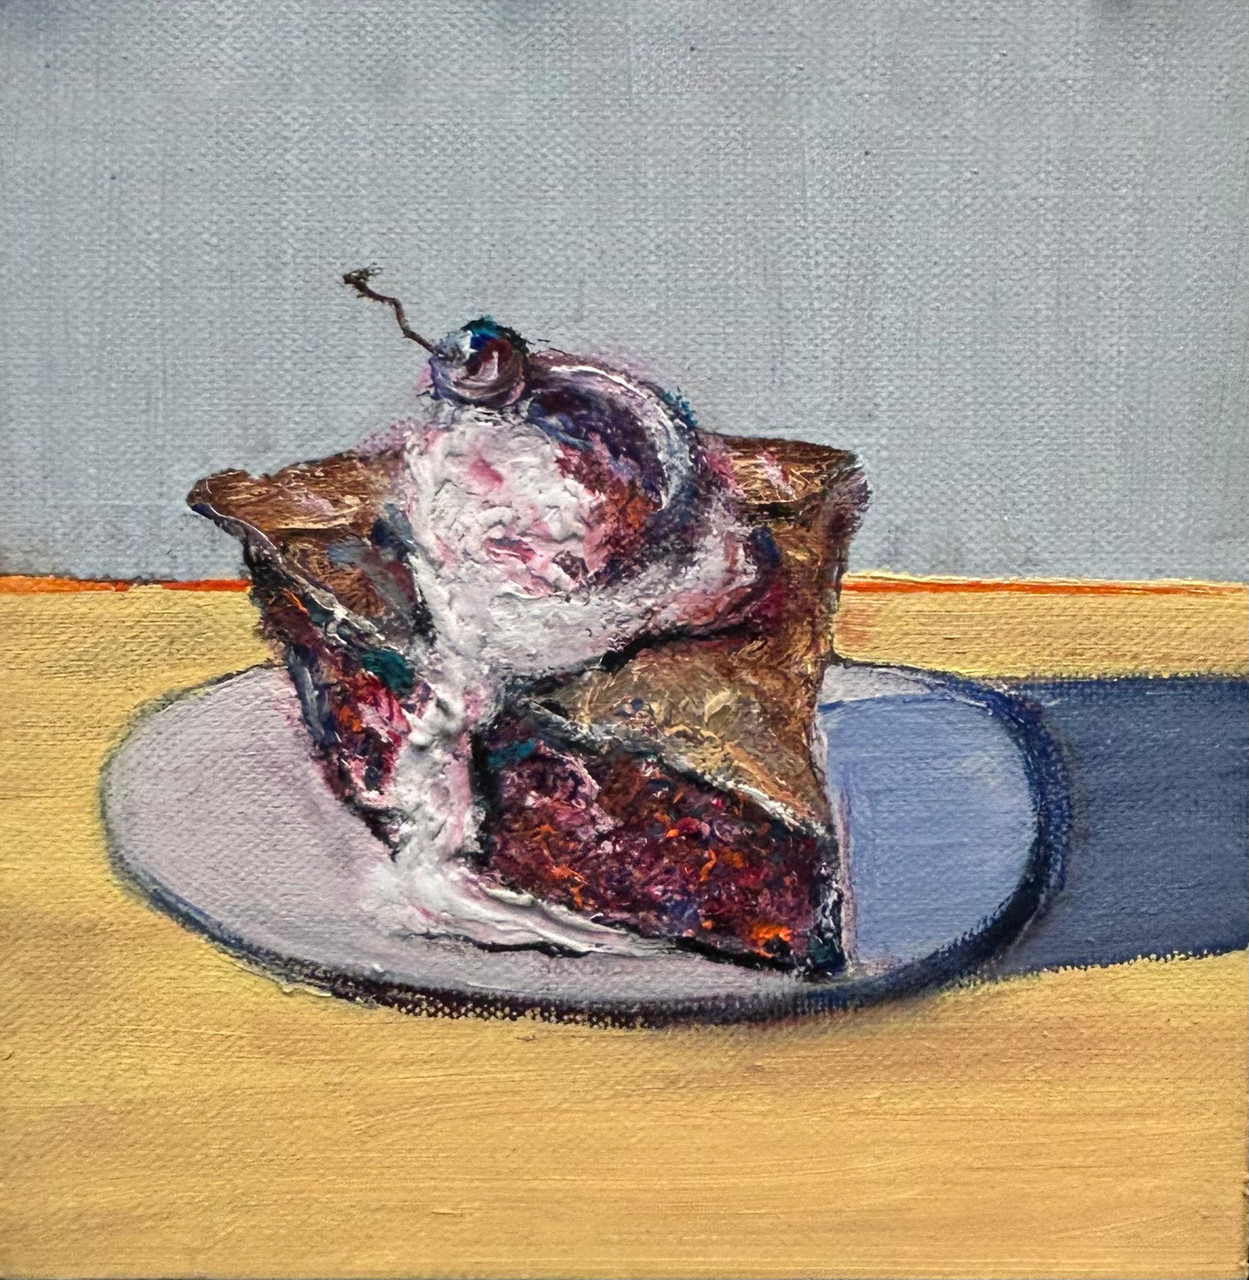 Clay Vorhes, Berry a’ la Mode, 2023, oil on linen, 6 x 6 inches